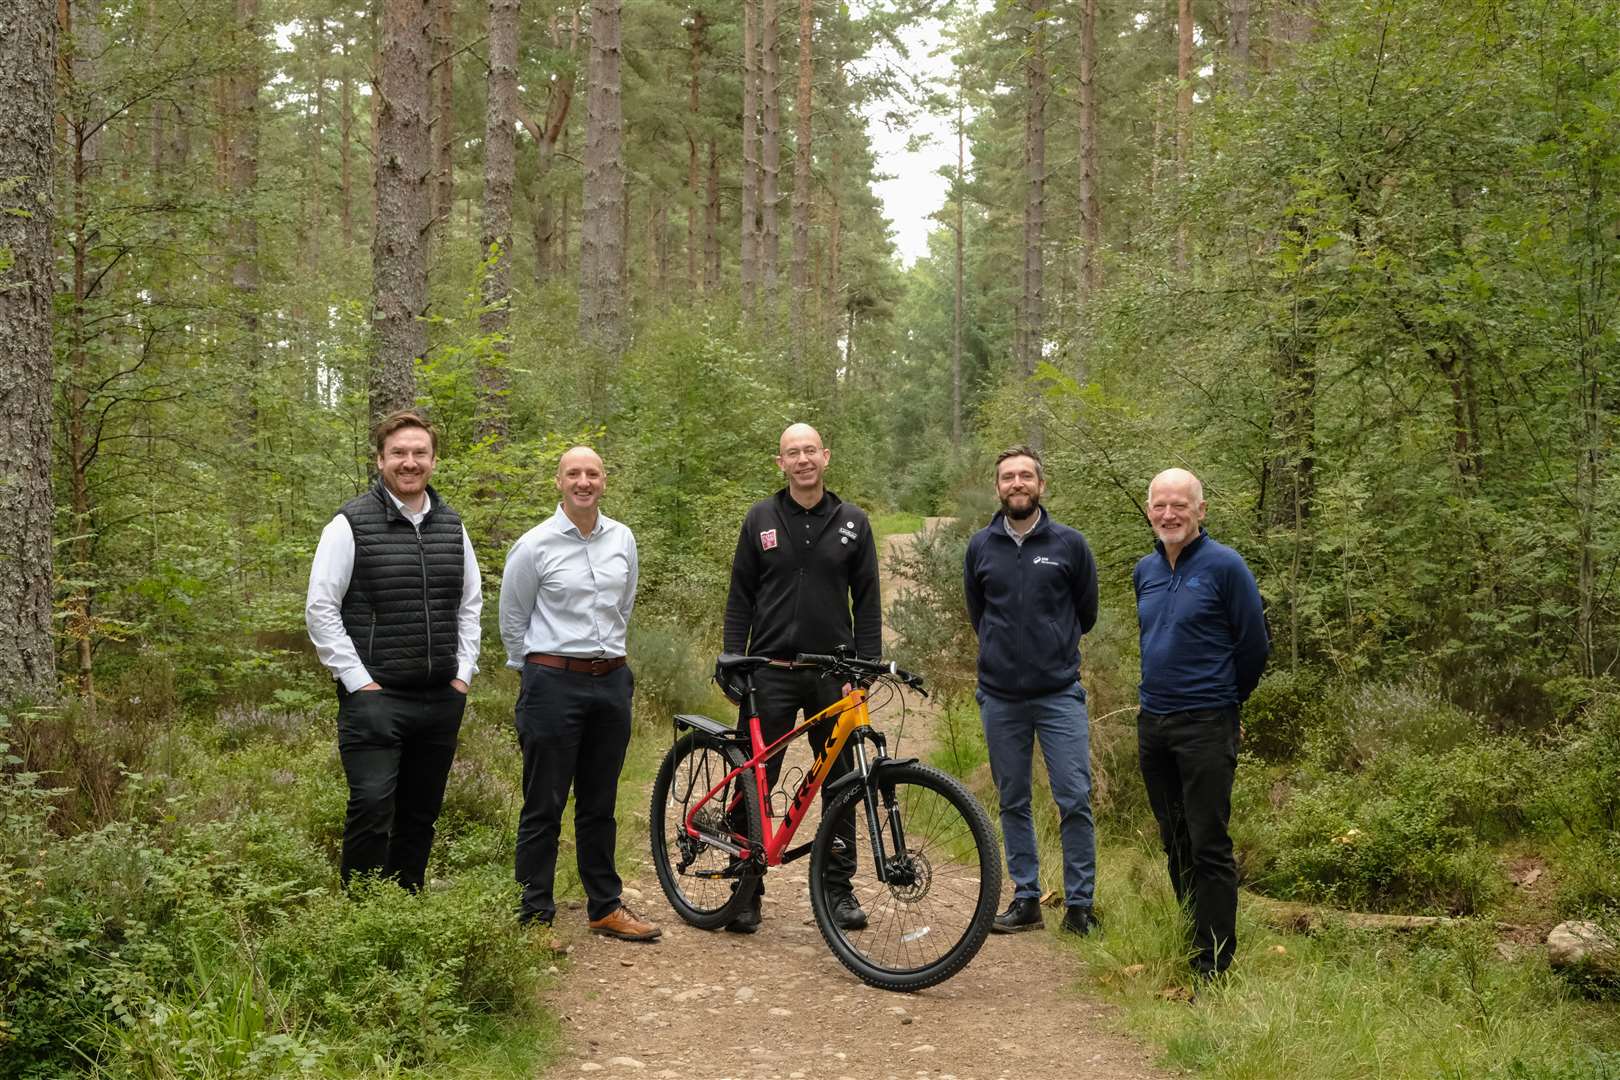 On the South Loch Ness Trail paths (from left) Michael Golding –Visit Inverness Loch Ness CEO; Chris Taylor of VisitScotland; Lindsay Mackinnon, owner of bike hire firm Ticket To Ride; Craig Cunningham, of SSE Renewables; and Graeme Ambrose, former Visit Inverness Loch Ness CEO.